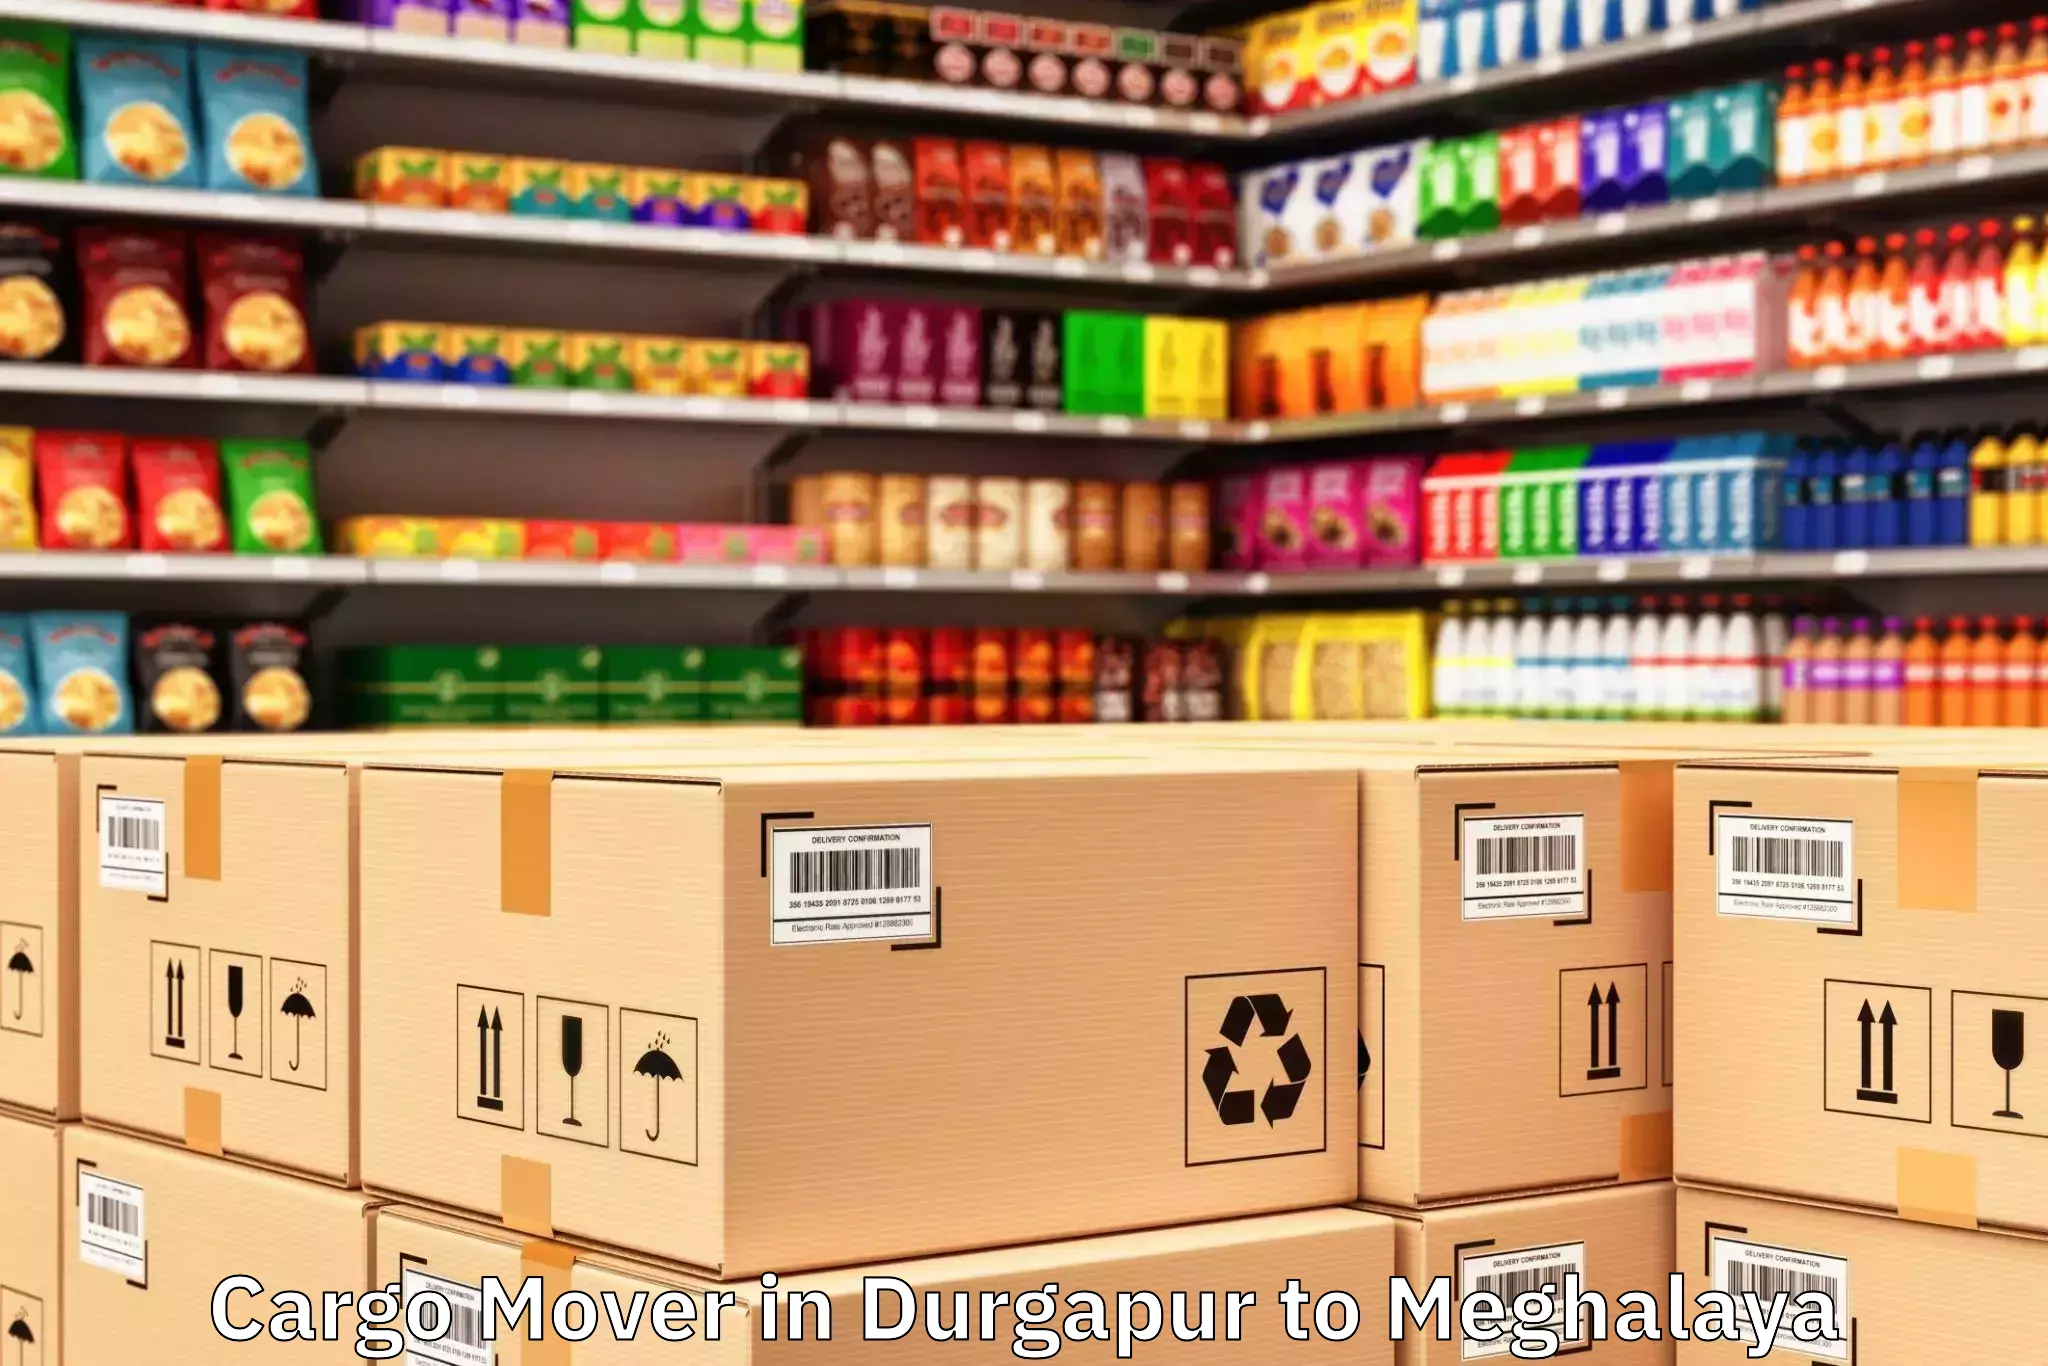 Easy Durgapur to Meghalaya Cargo Mover Booking